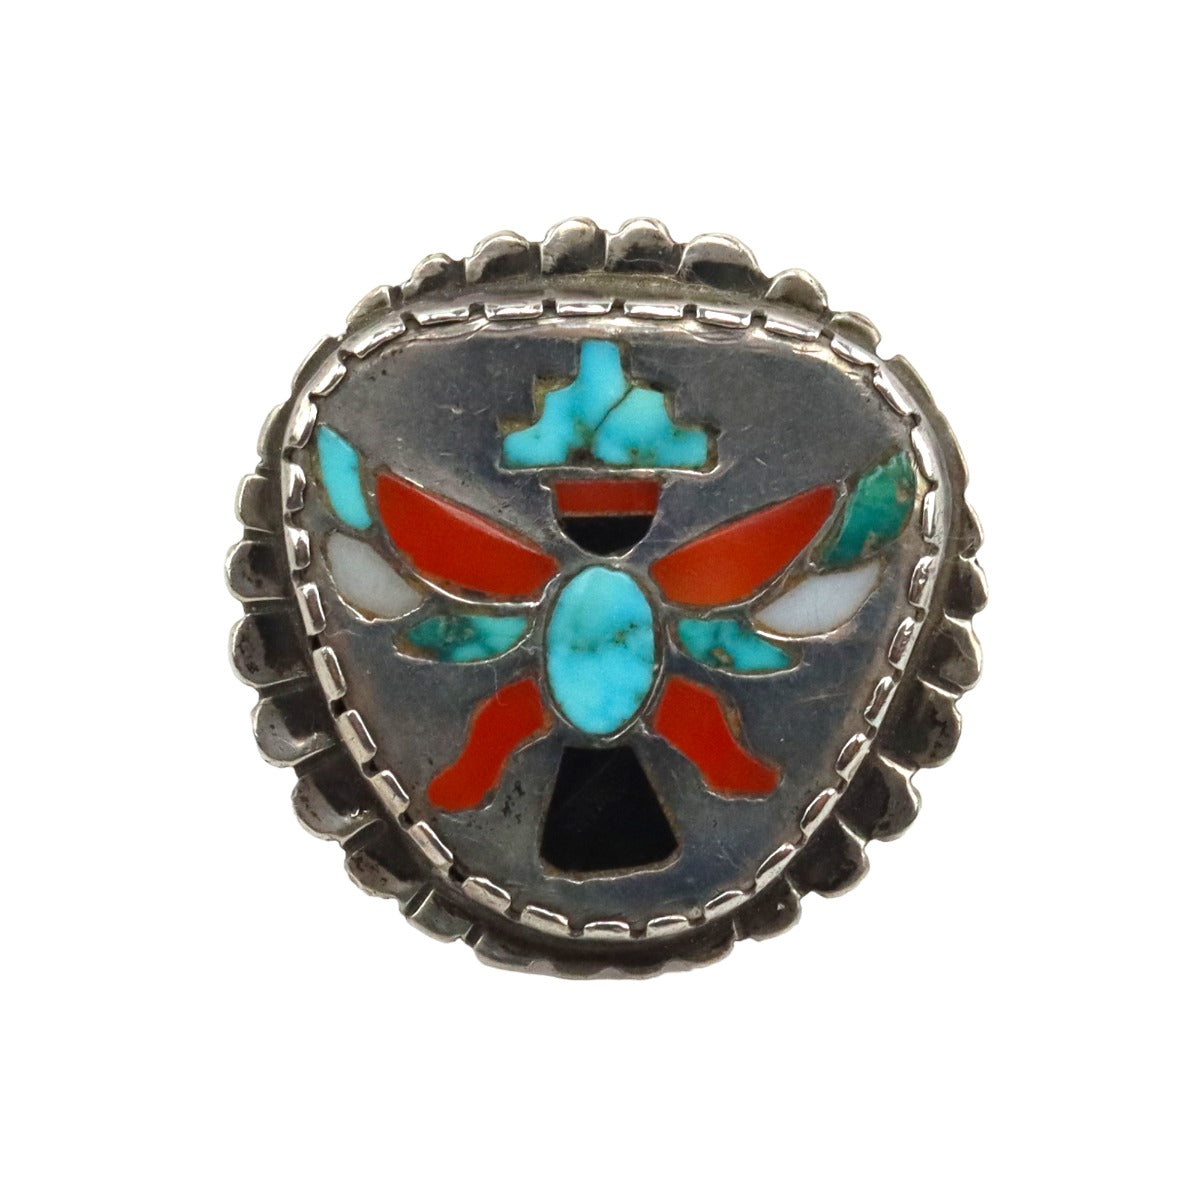 Zuni Multi-Stone Inlay and Silver Ring with Knifewing God Design c. 1950s, size 7.75 (J15076-CO-014)